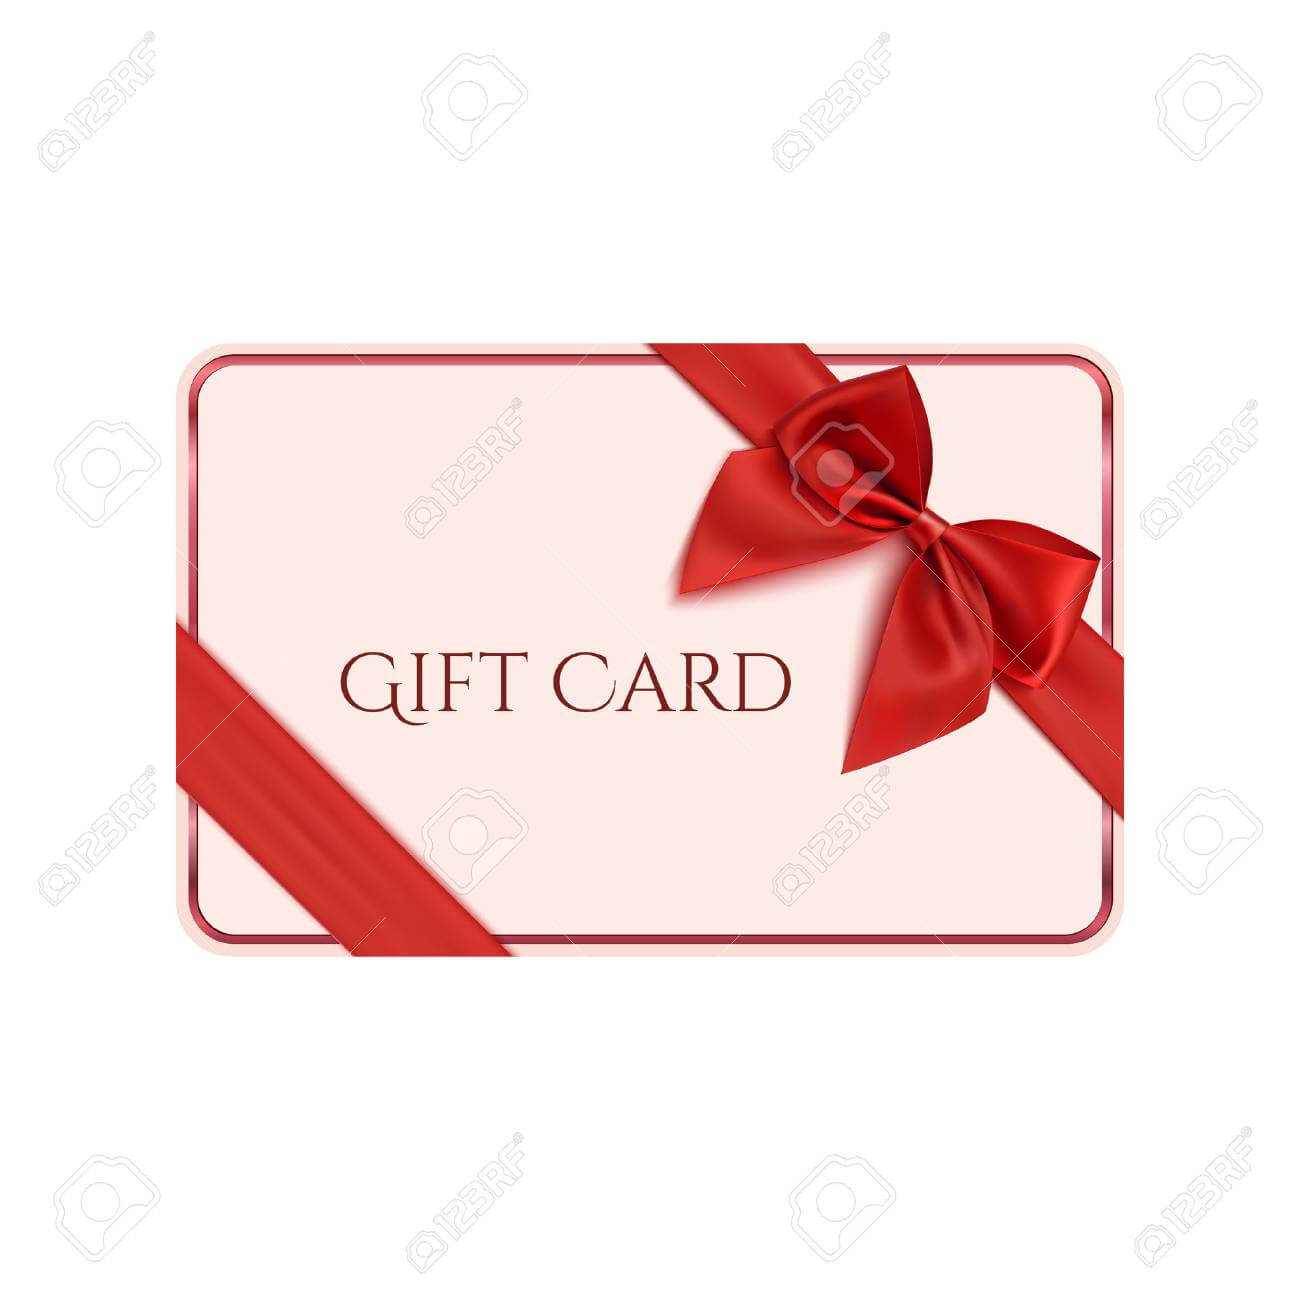 Gift Card Template With Red Ribbon And A Bow. Vector Illustration Within Present Card Template